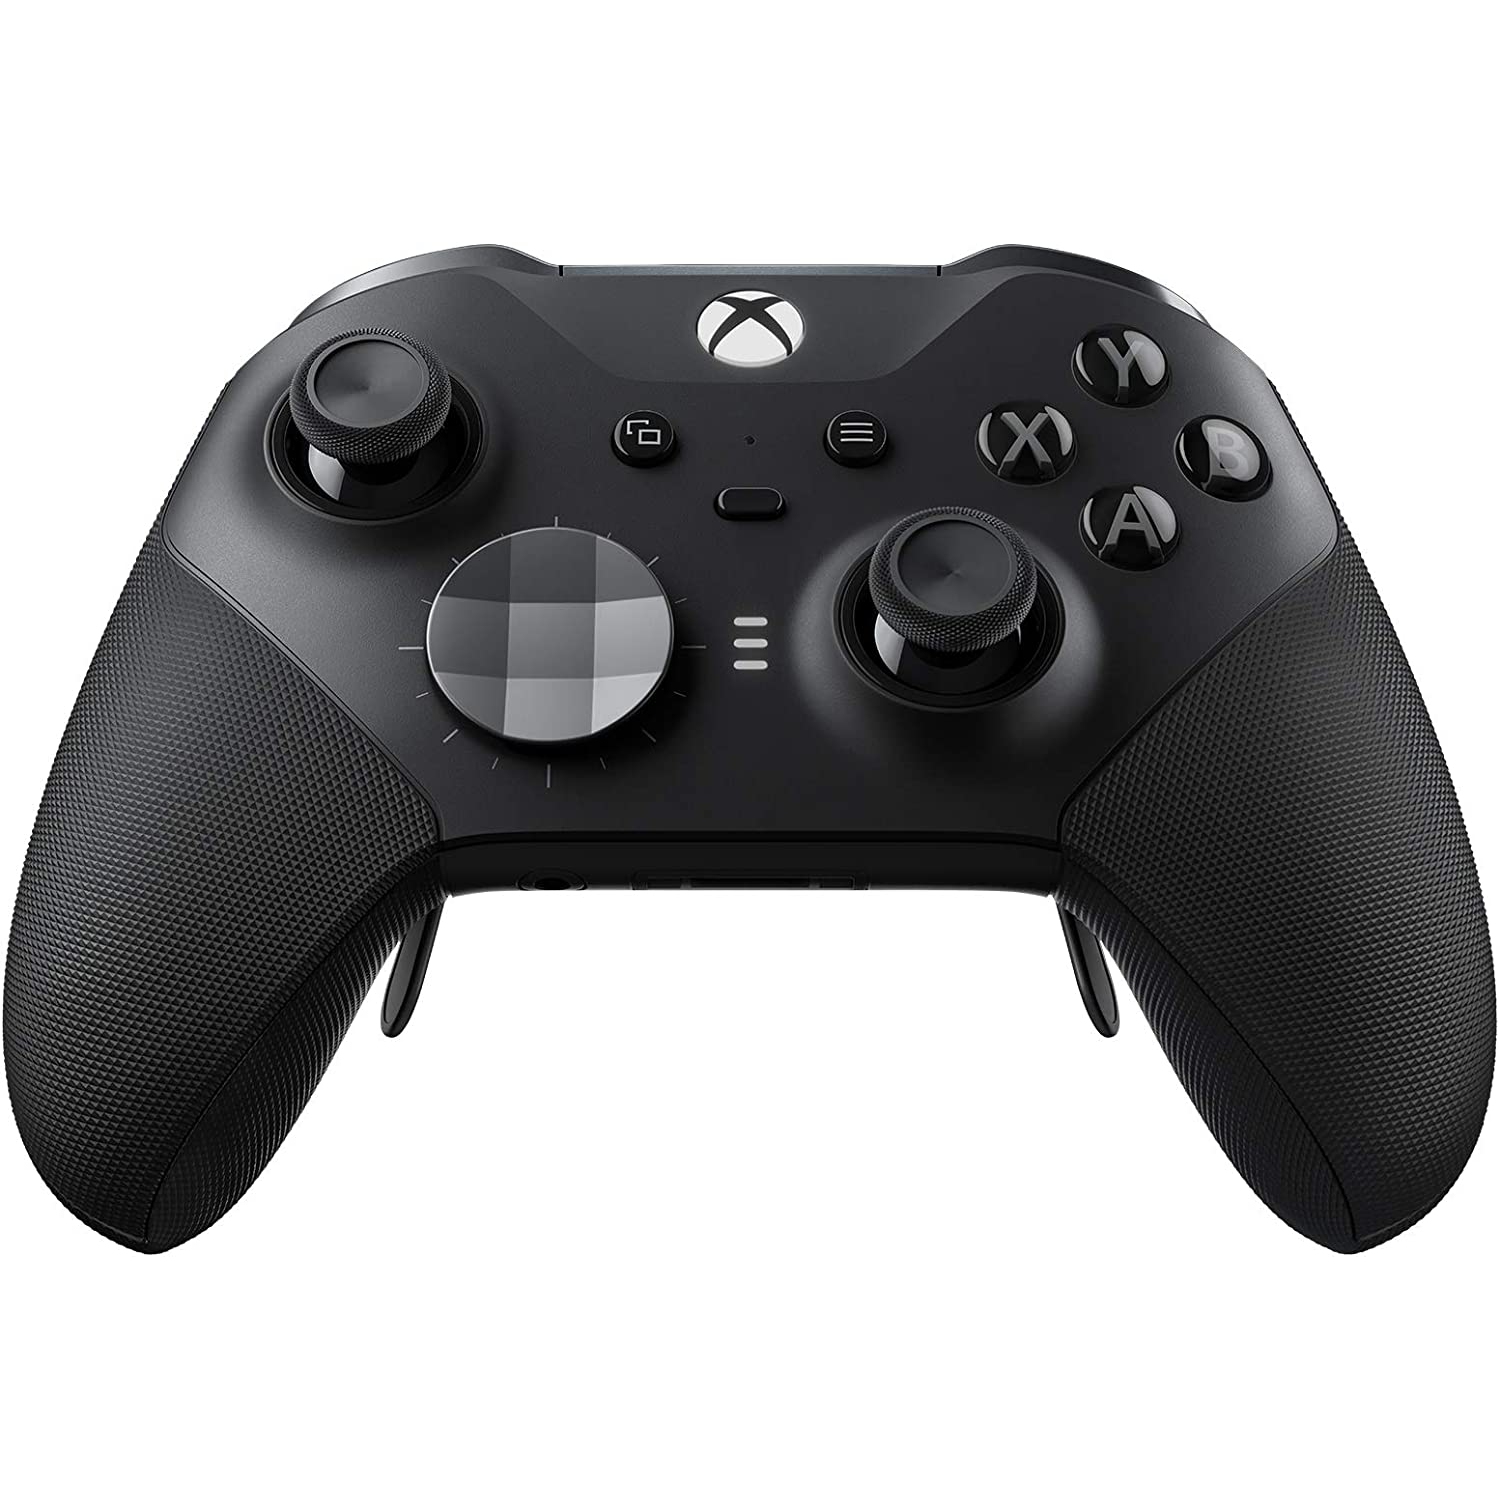 Open Box - Xbox Elite Wireless Controller Series 2 for Xbox Series X|S, Xbox One, and Windows Devices - Black